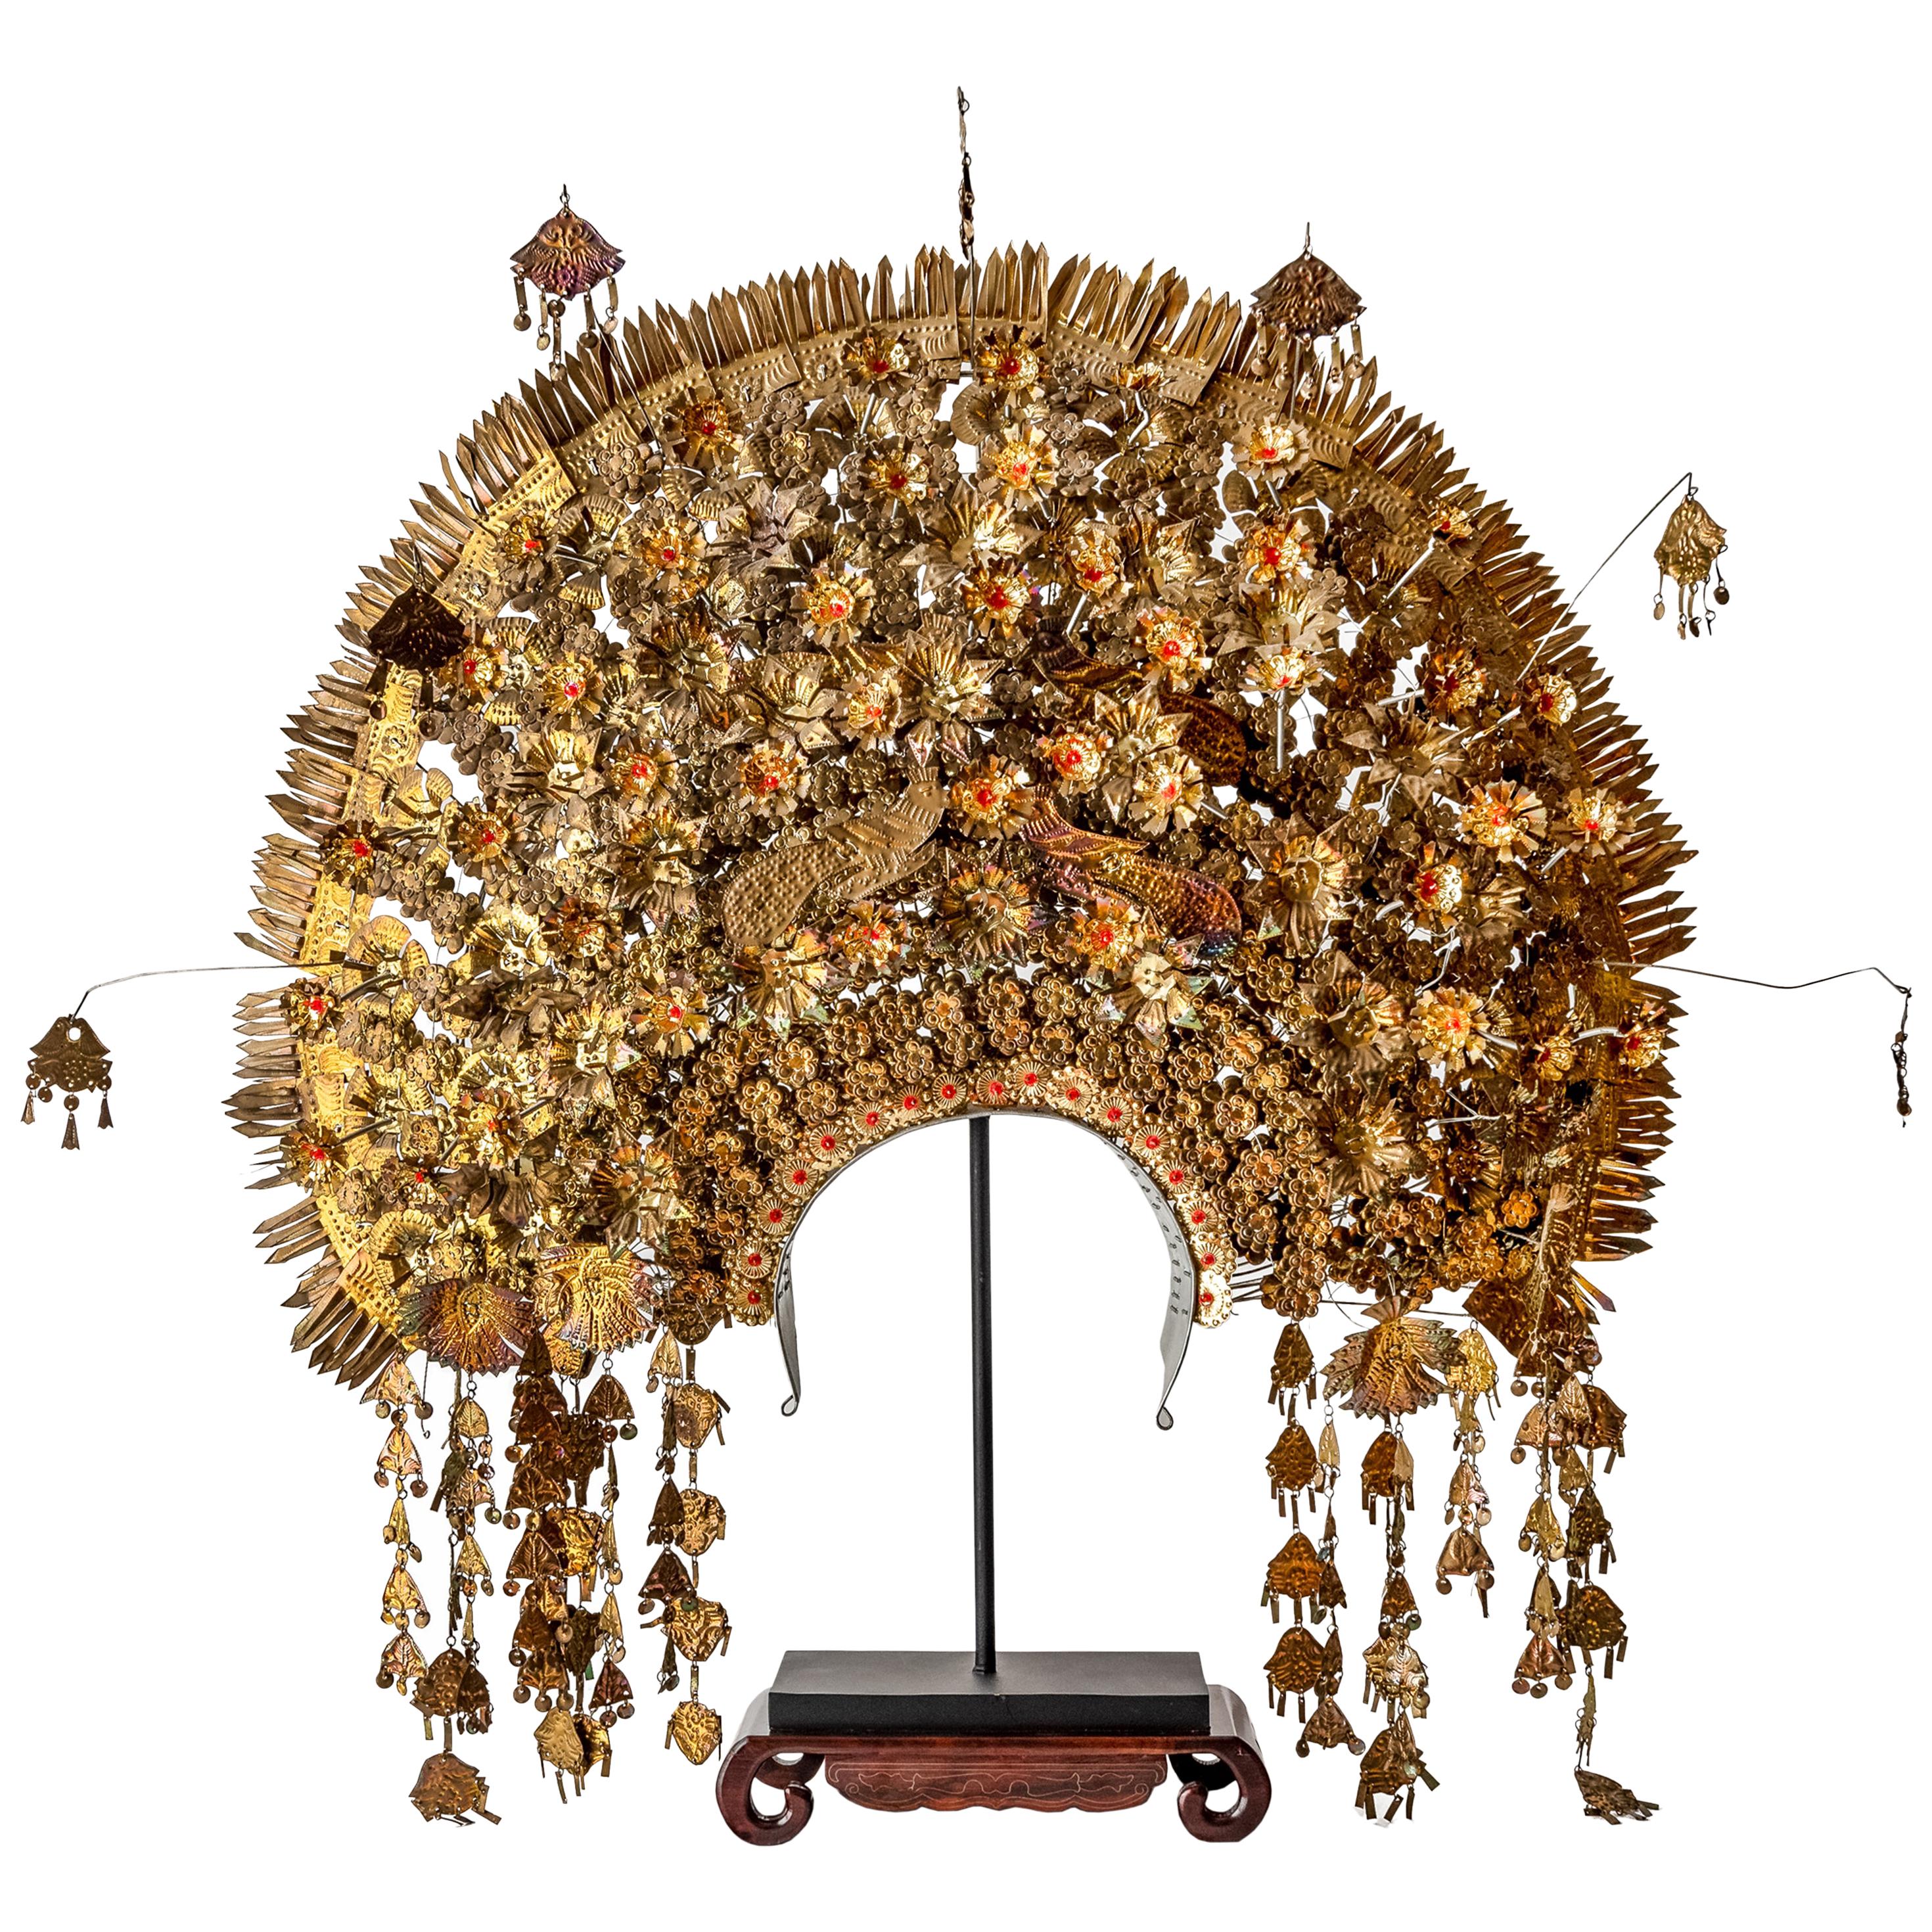 Indonesian Brass, and Golden Plated Wedding Crown, Suntiang